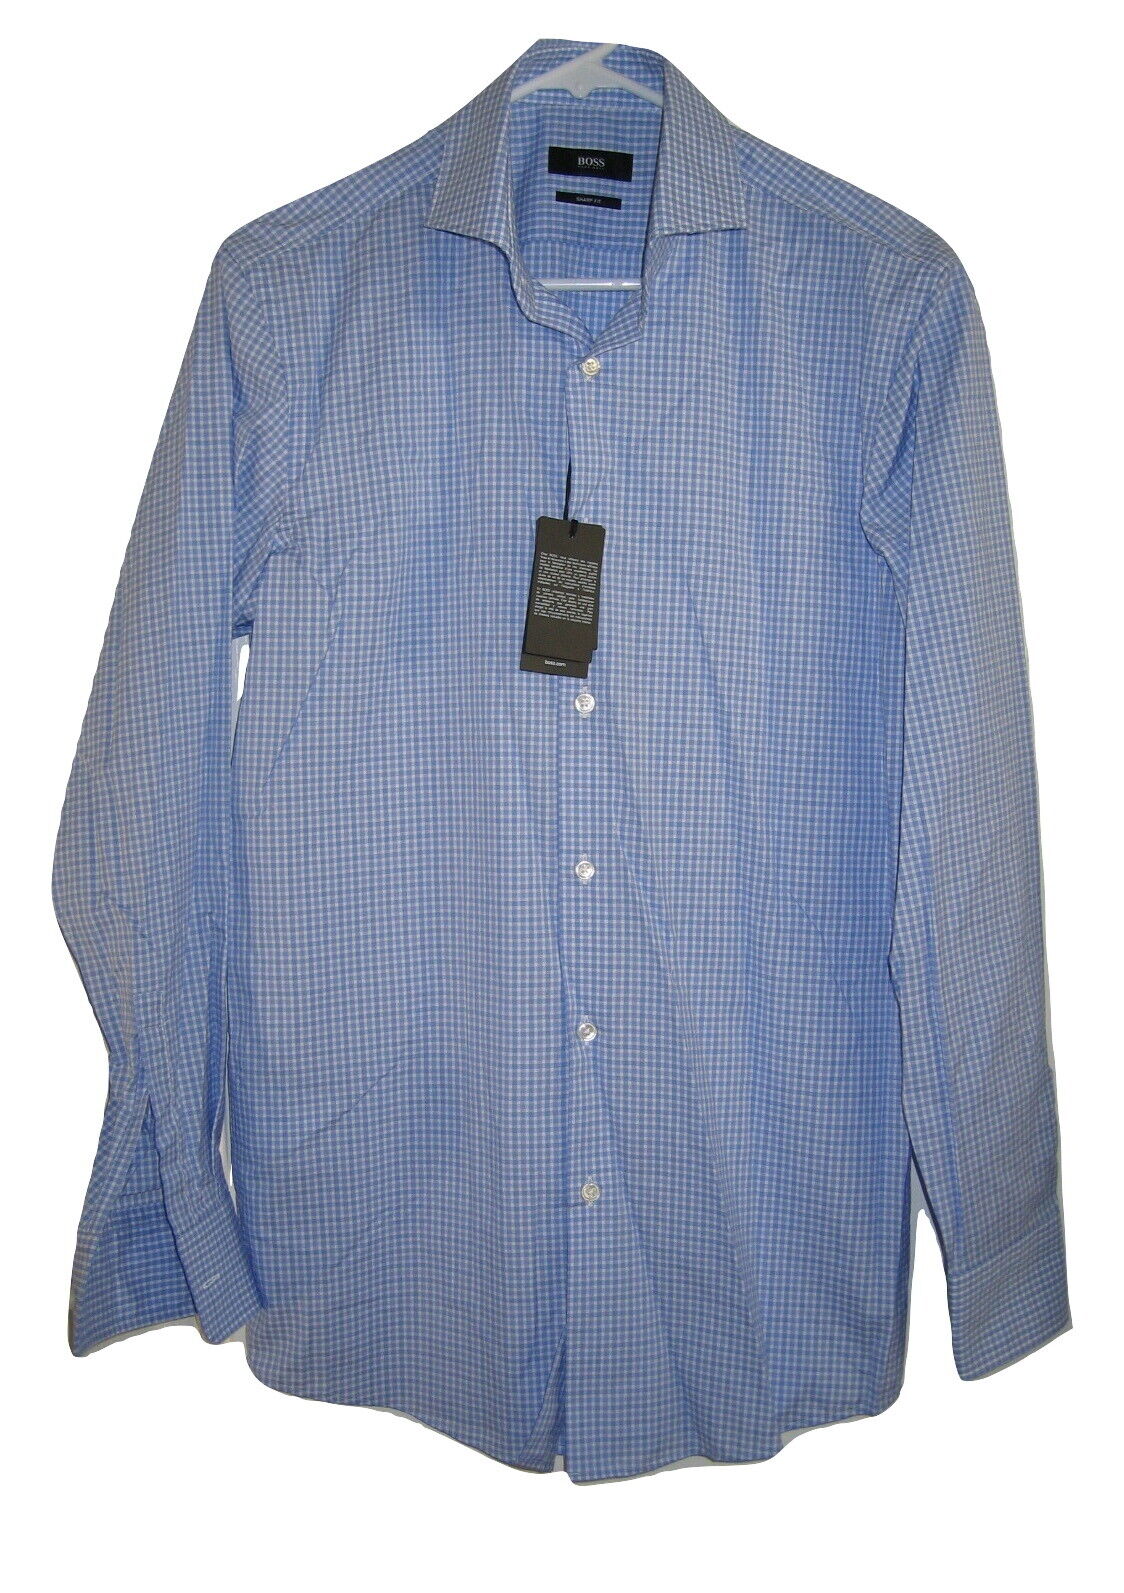 NWT Blue HUGO BOSS Mens Sharp Fit Check 15 3 Dress Sales of SALE items from new works Shirt Gingham Purchase